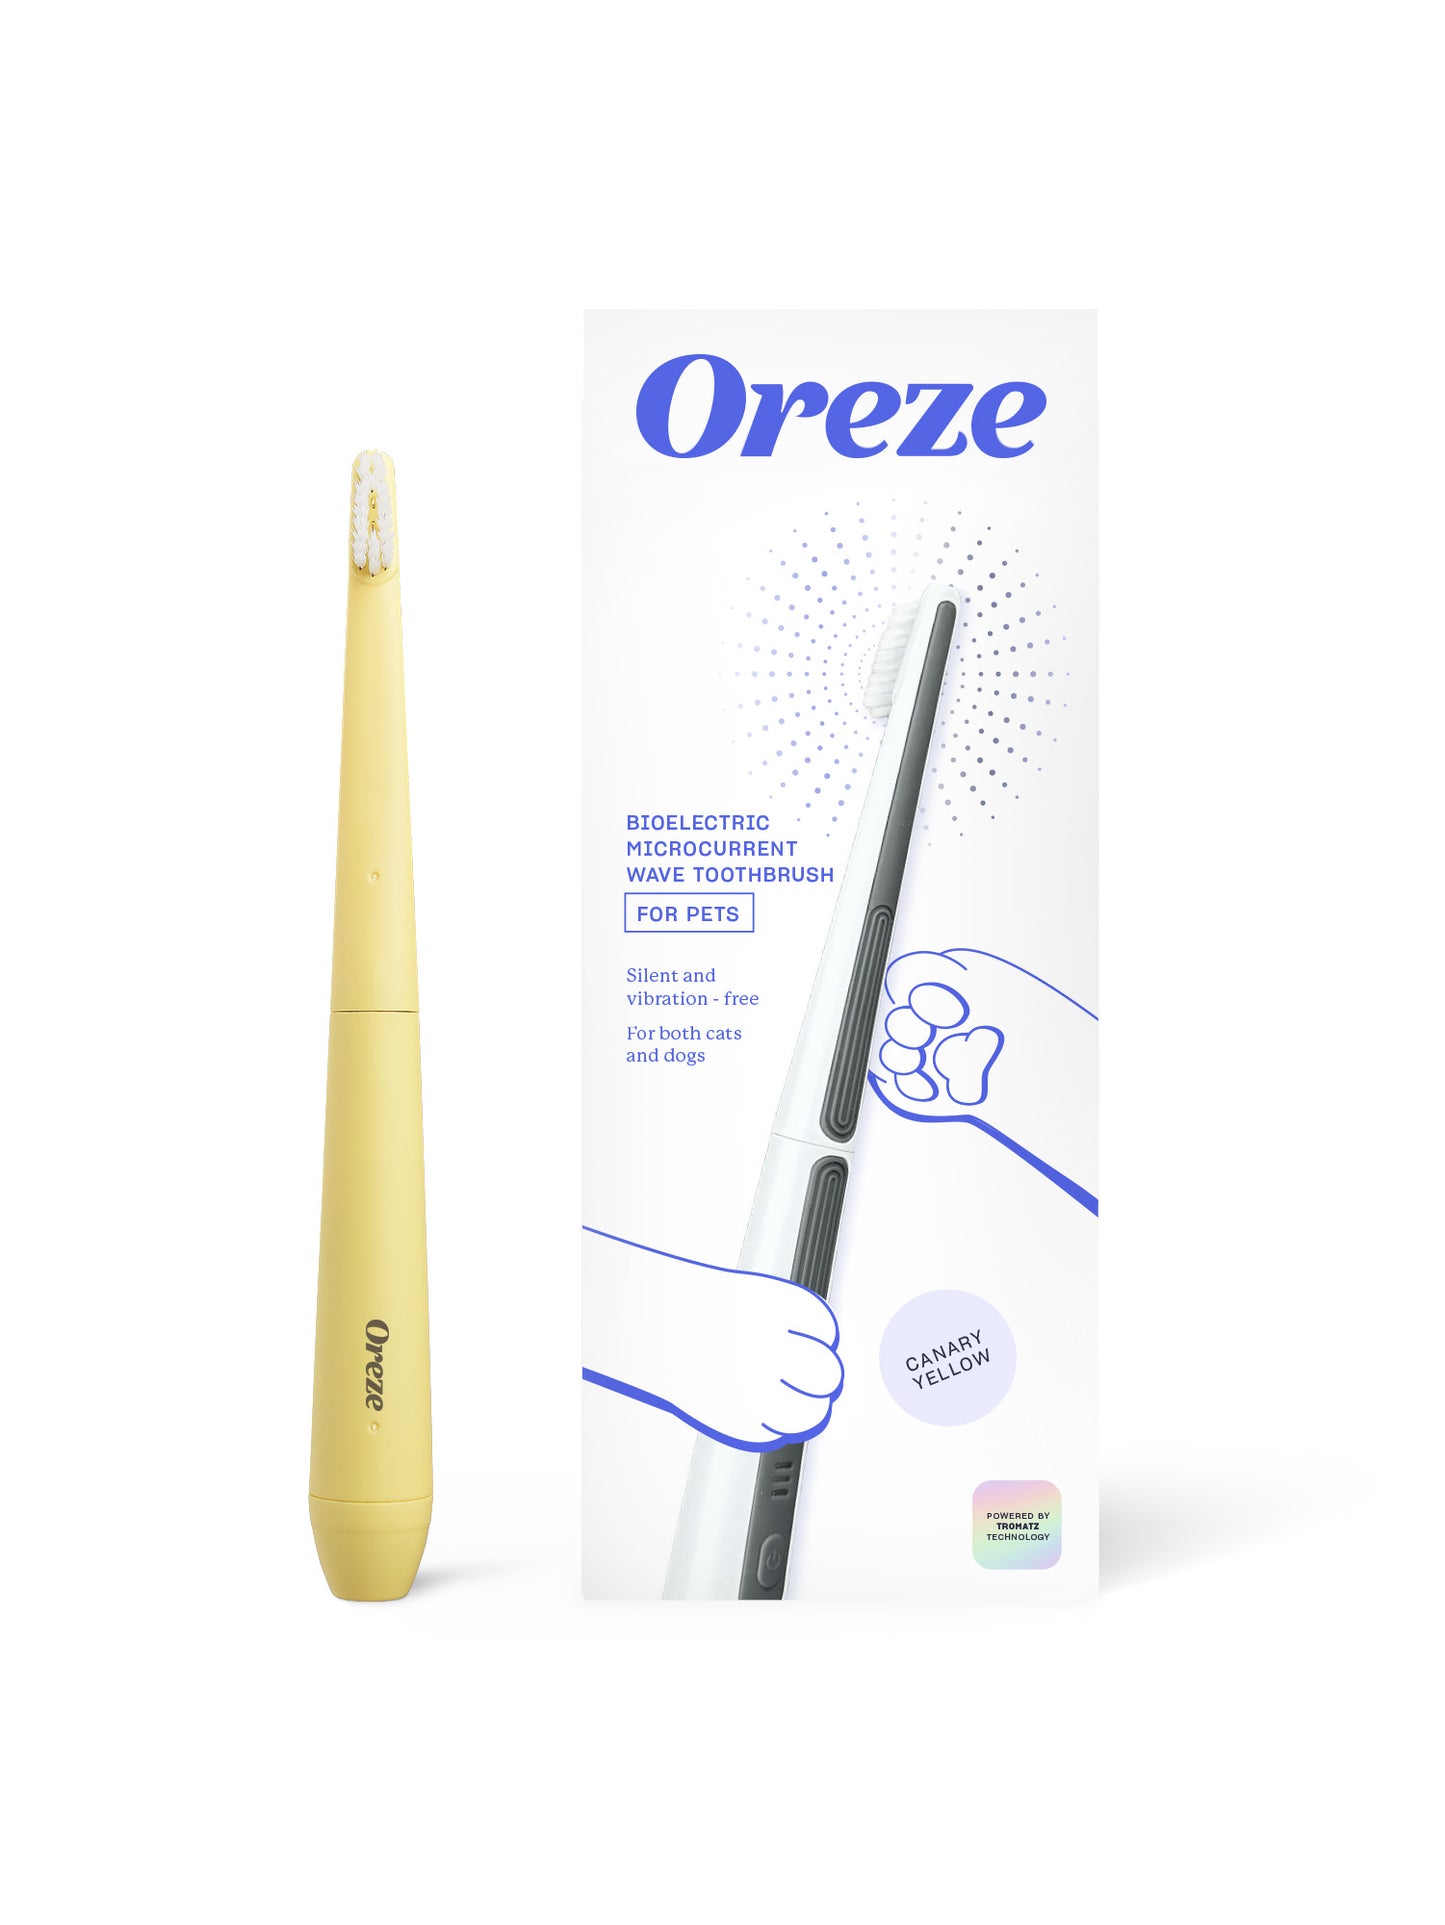 Oreze pet toothbrush in canary yellow